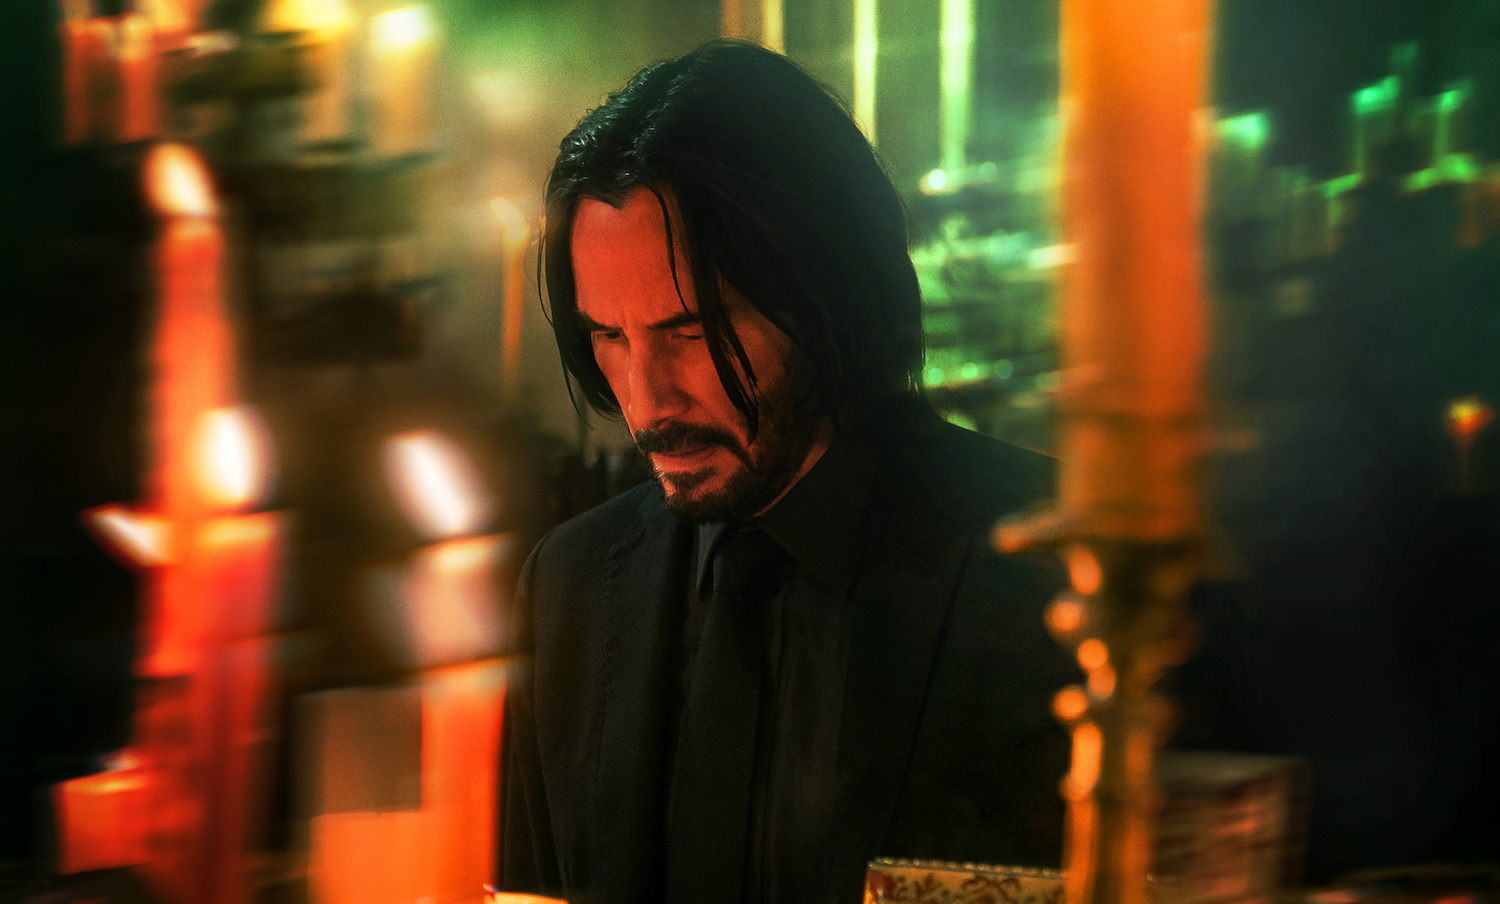 John Wick: Chapter 2 Finds Vengeance the Slow Way